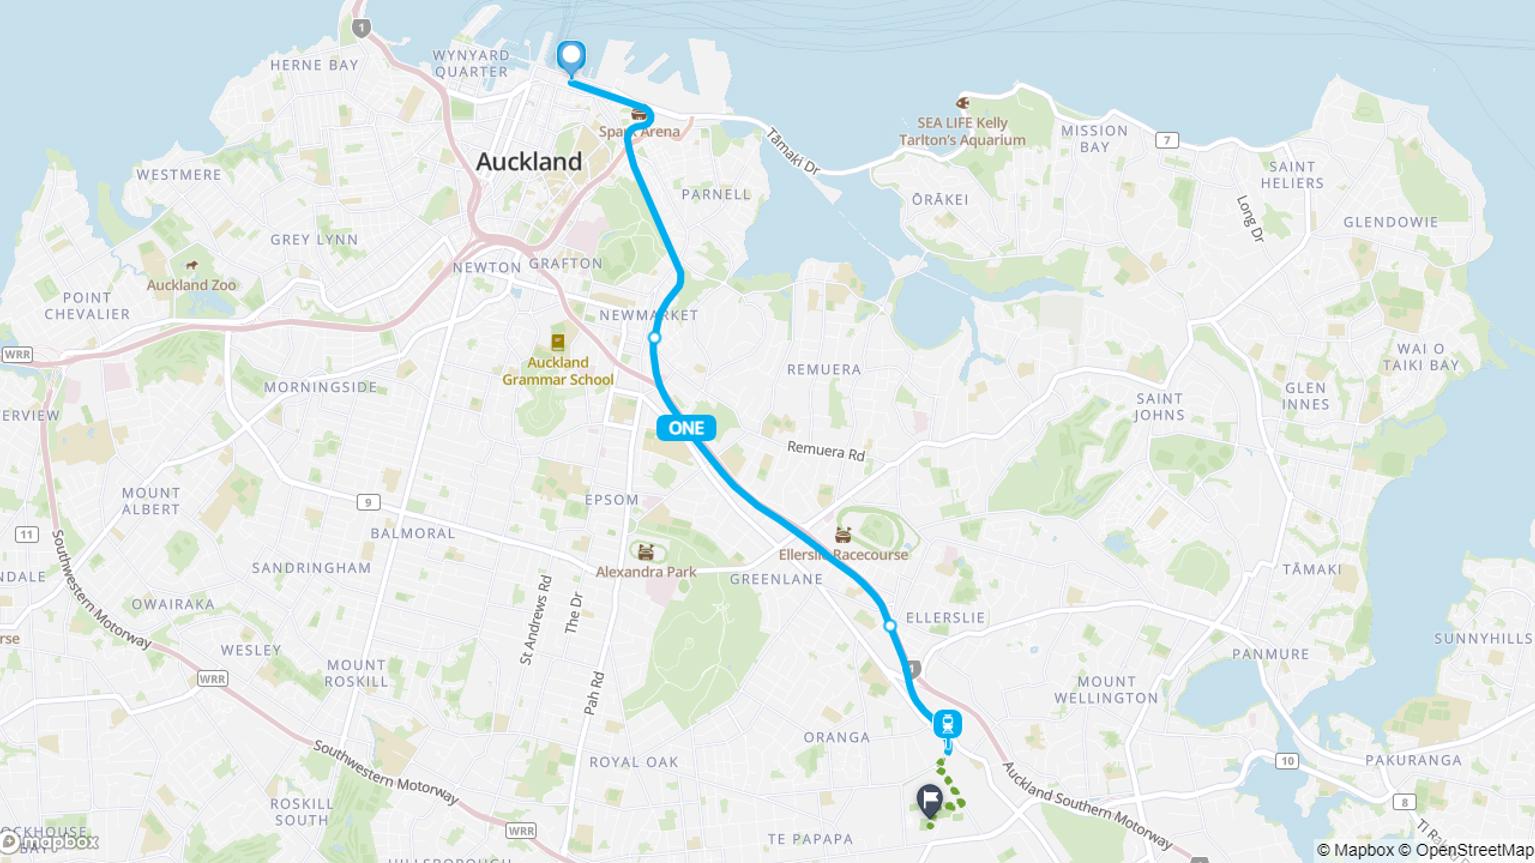 Britomart to Penrose Station train route map